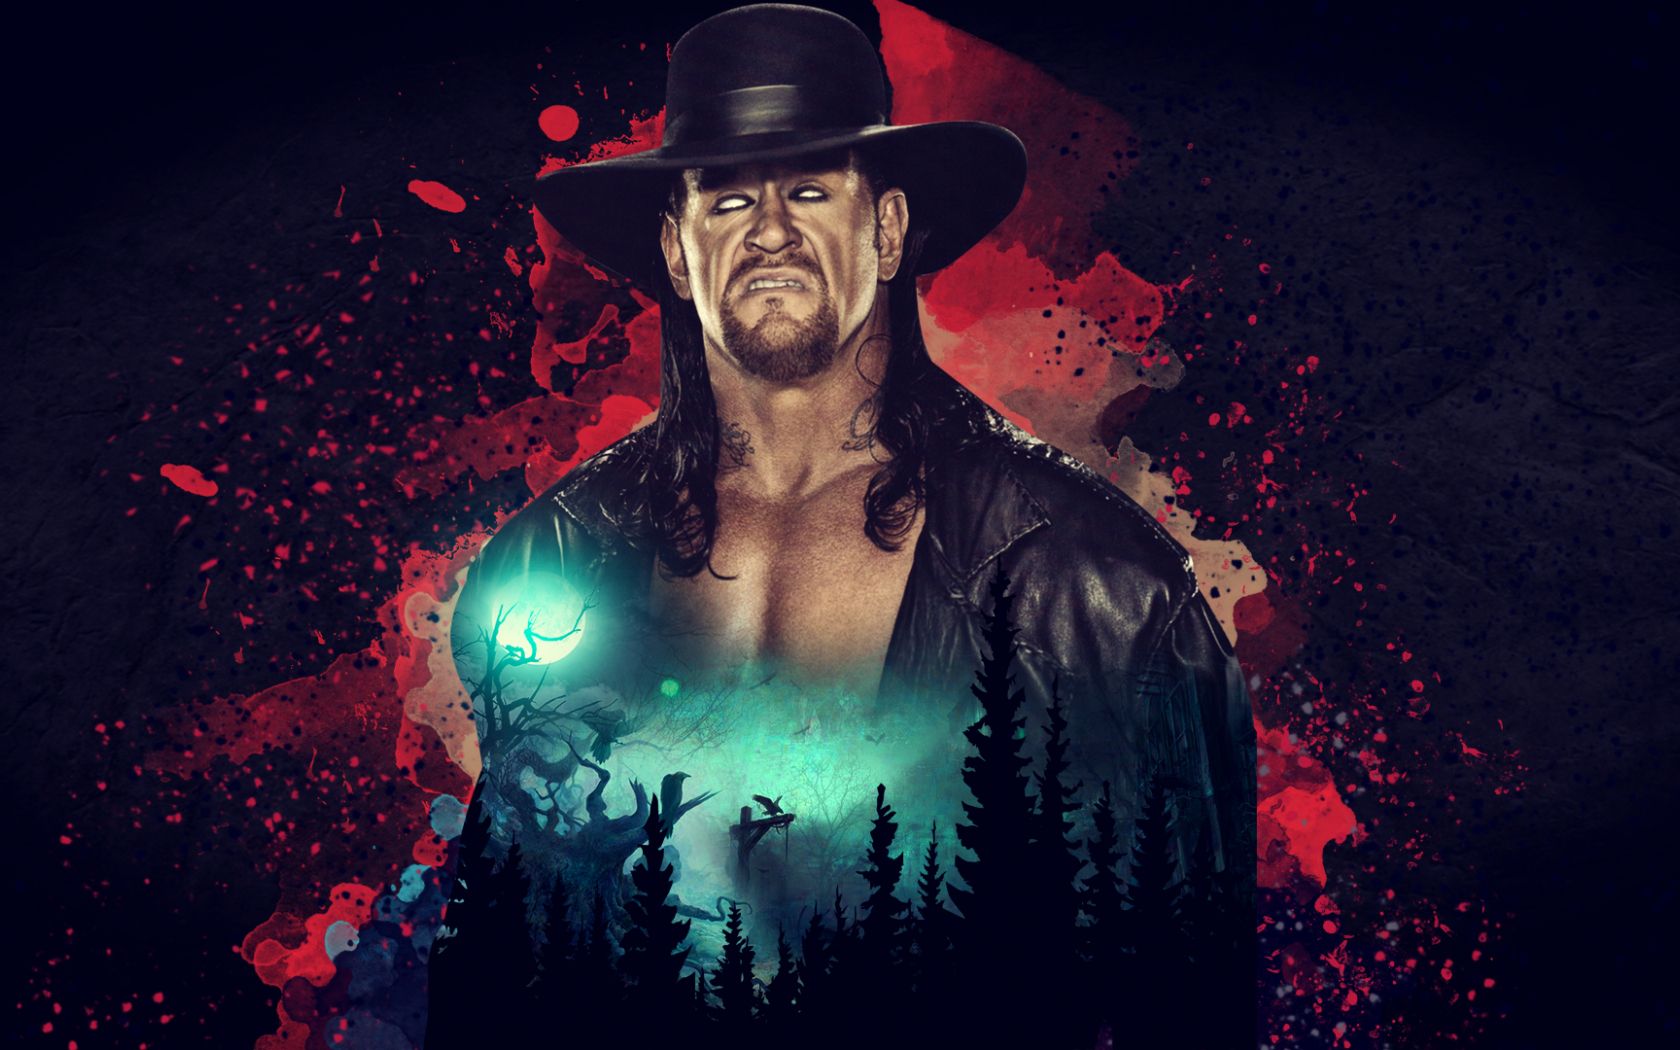 Free download The Undertaker HD Wallpaper [1920x1080] for your Desktop, Mobile & Tablet. Explore Wwe Undertaker Wallpaper. The Undertaker Wallpaper, Wwe Wallpaper For Computer, WWE Custom Undertaker Wallpaper